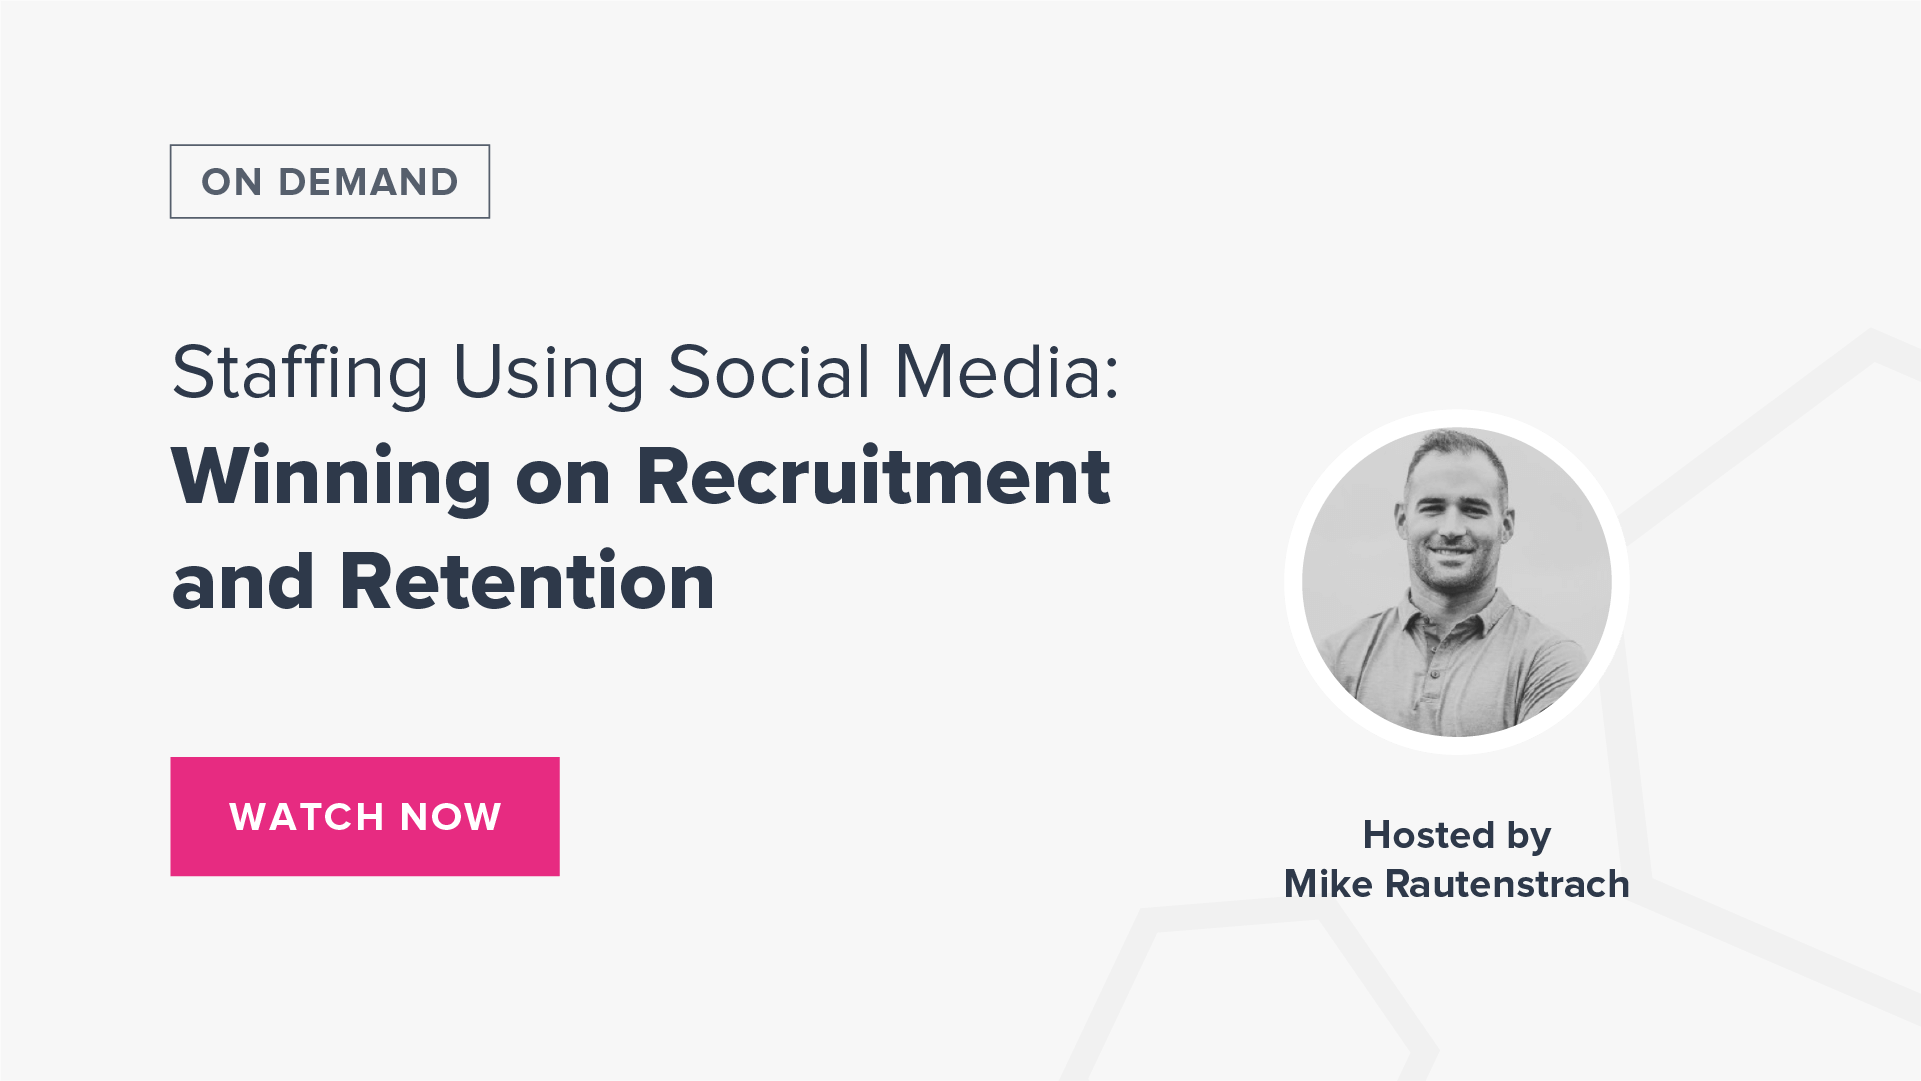 Staffing Using Social Media: Winning on Recruitment and Retention